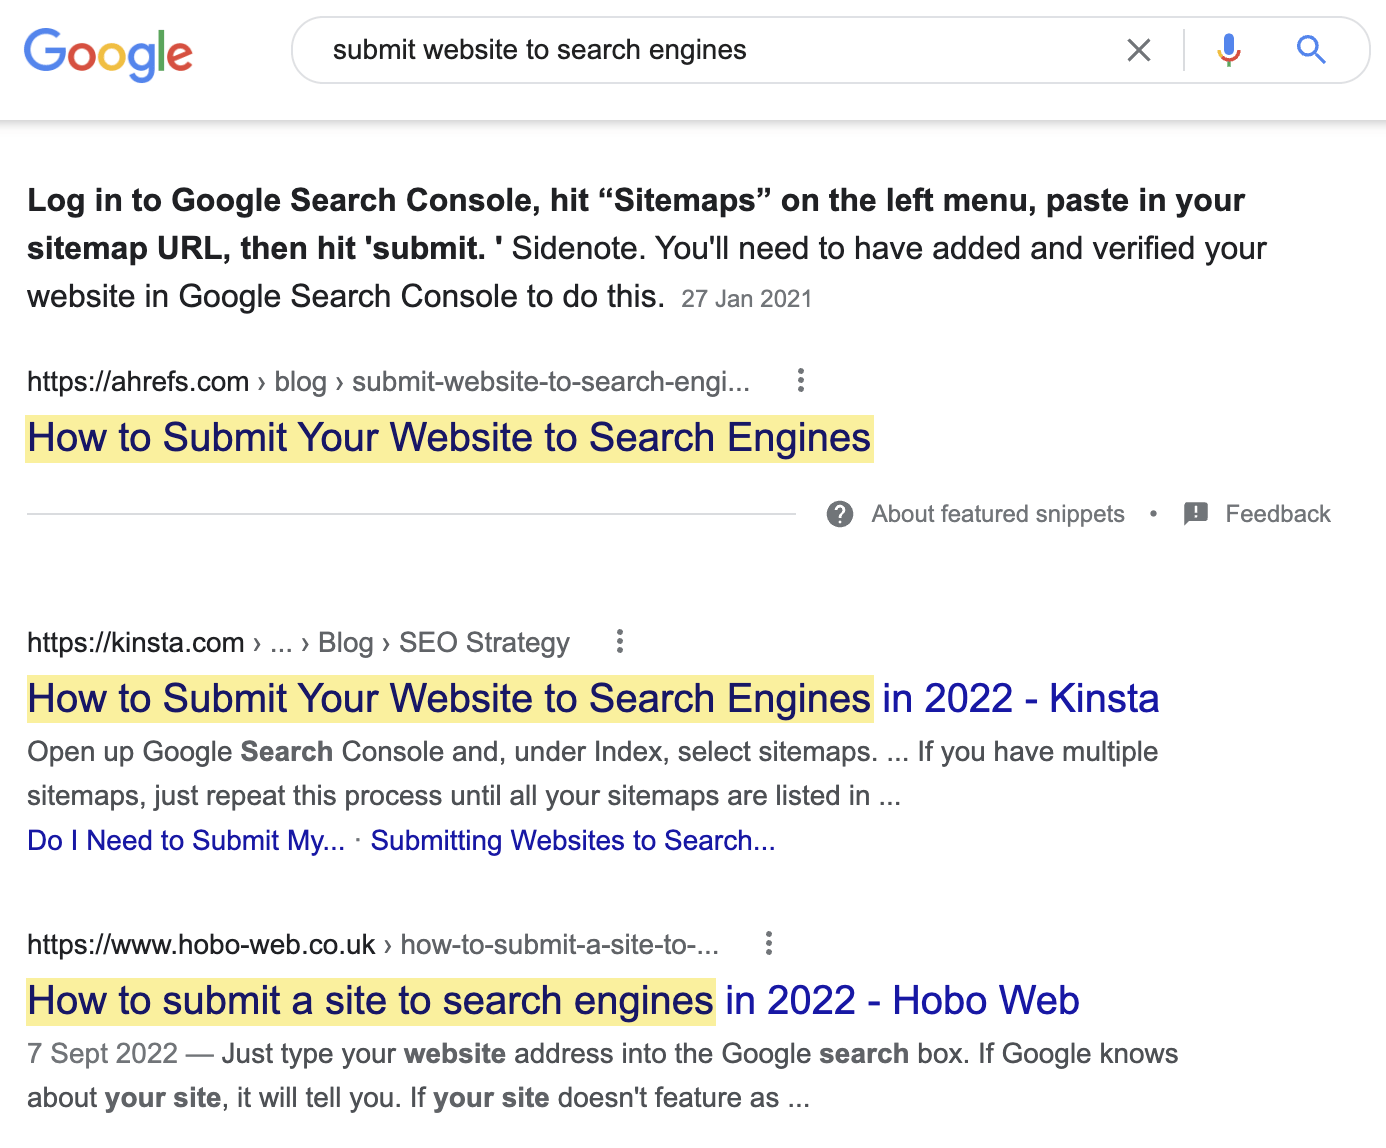 People searching for "submit website to search engines" want to know how to submit their websites
